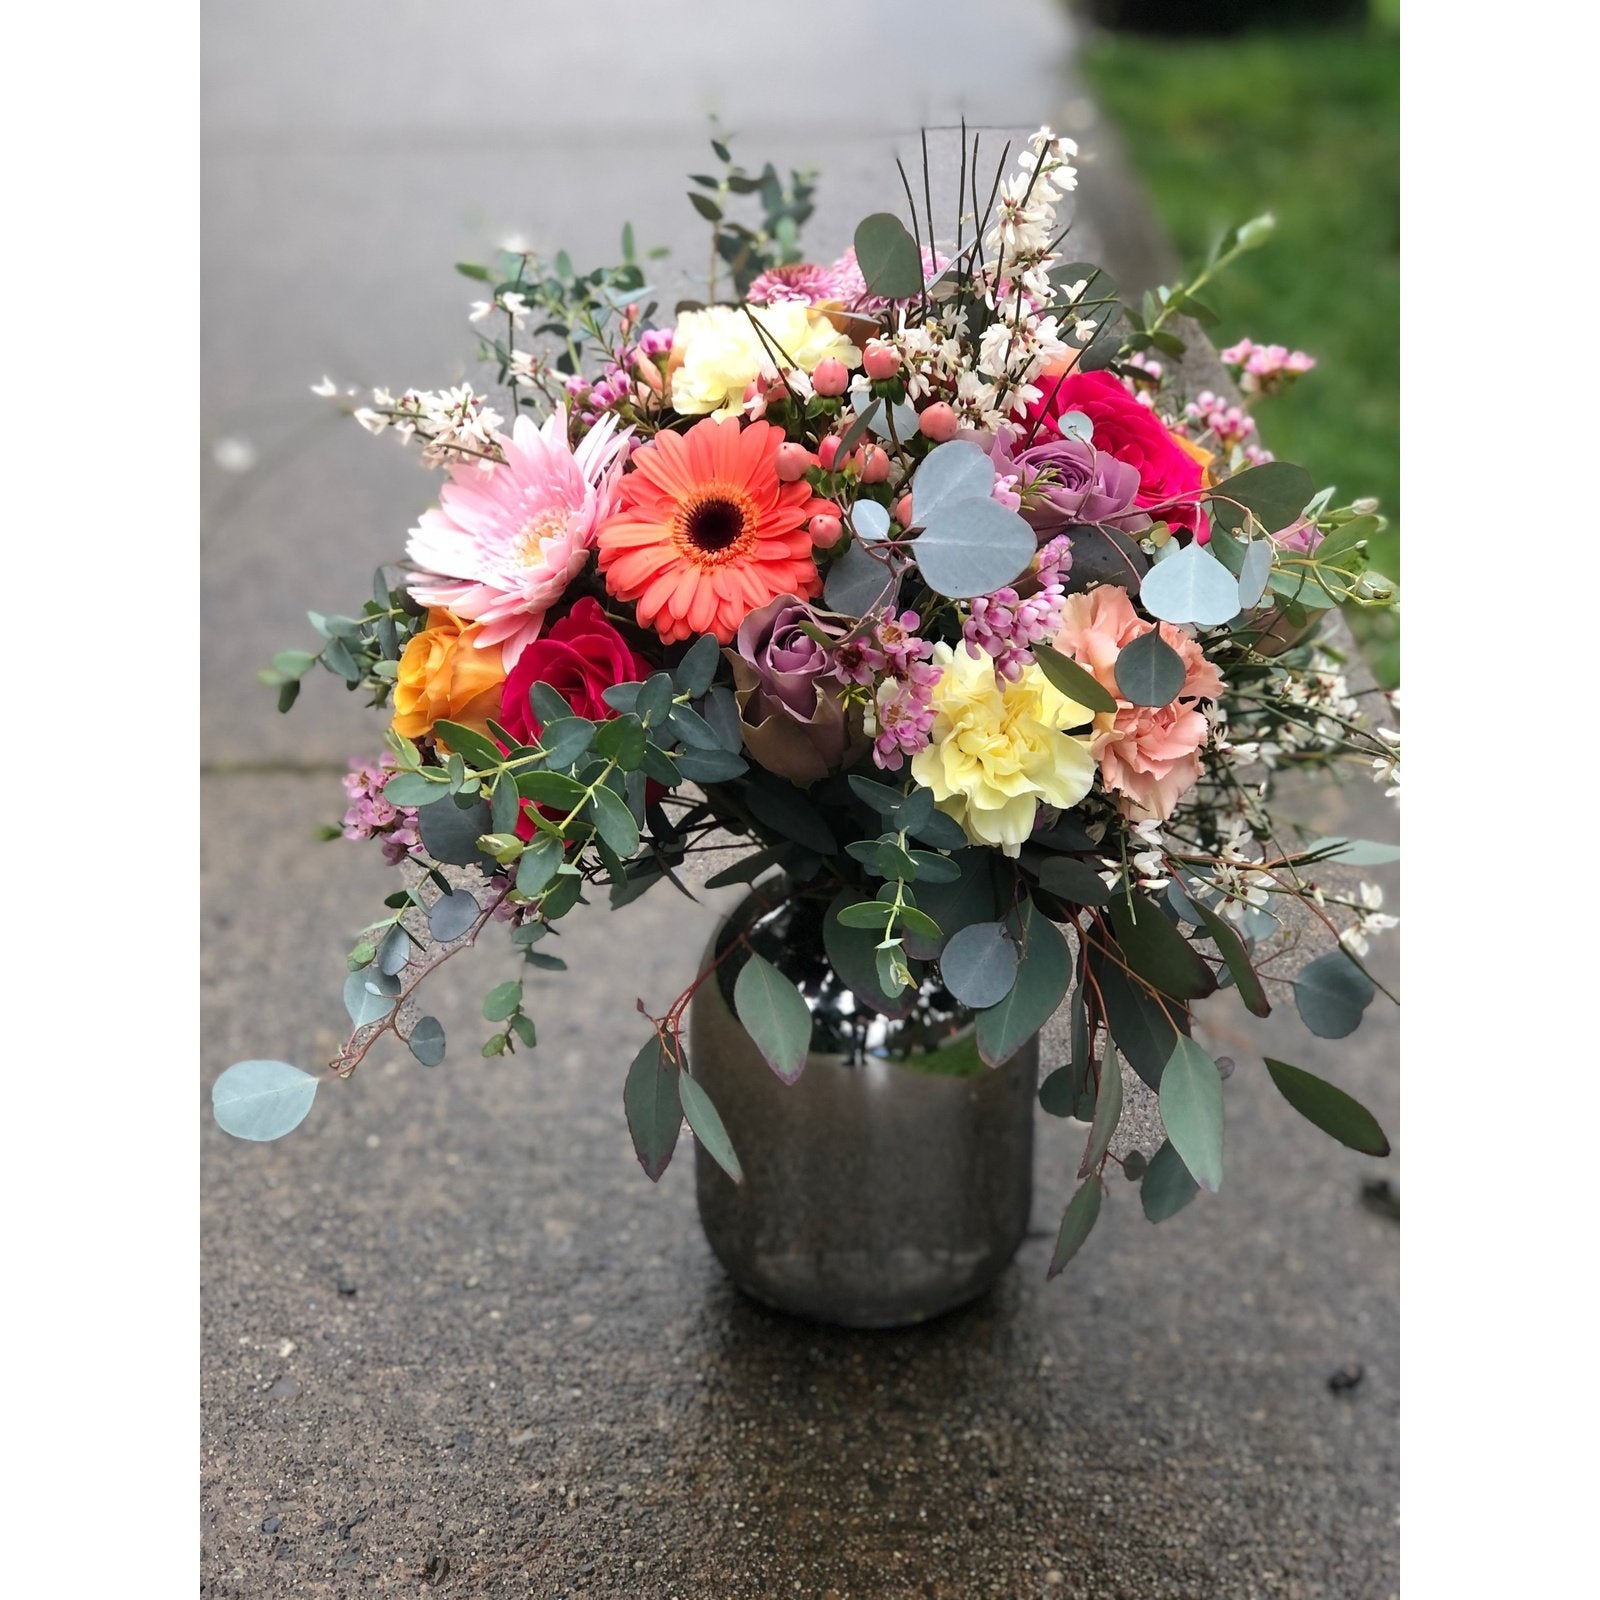 cheerful flowers in a silver vase arrangement. flower delivery for mothers day in richmond, bc